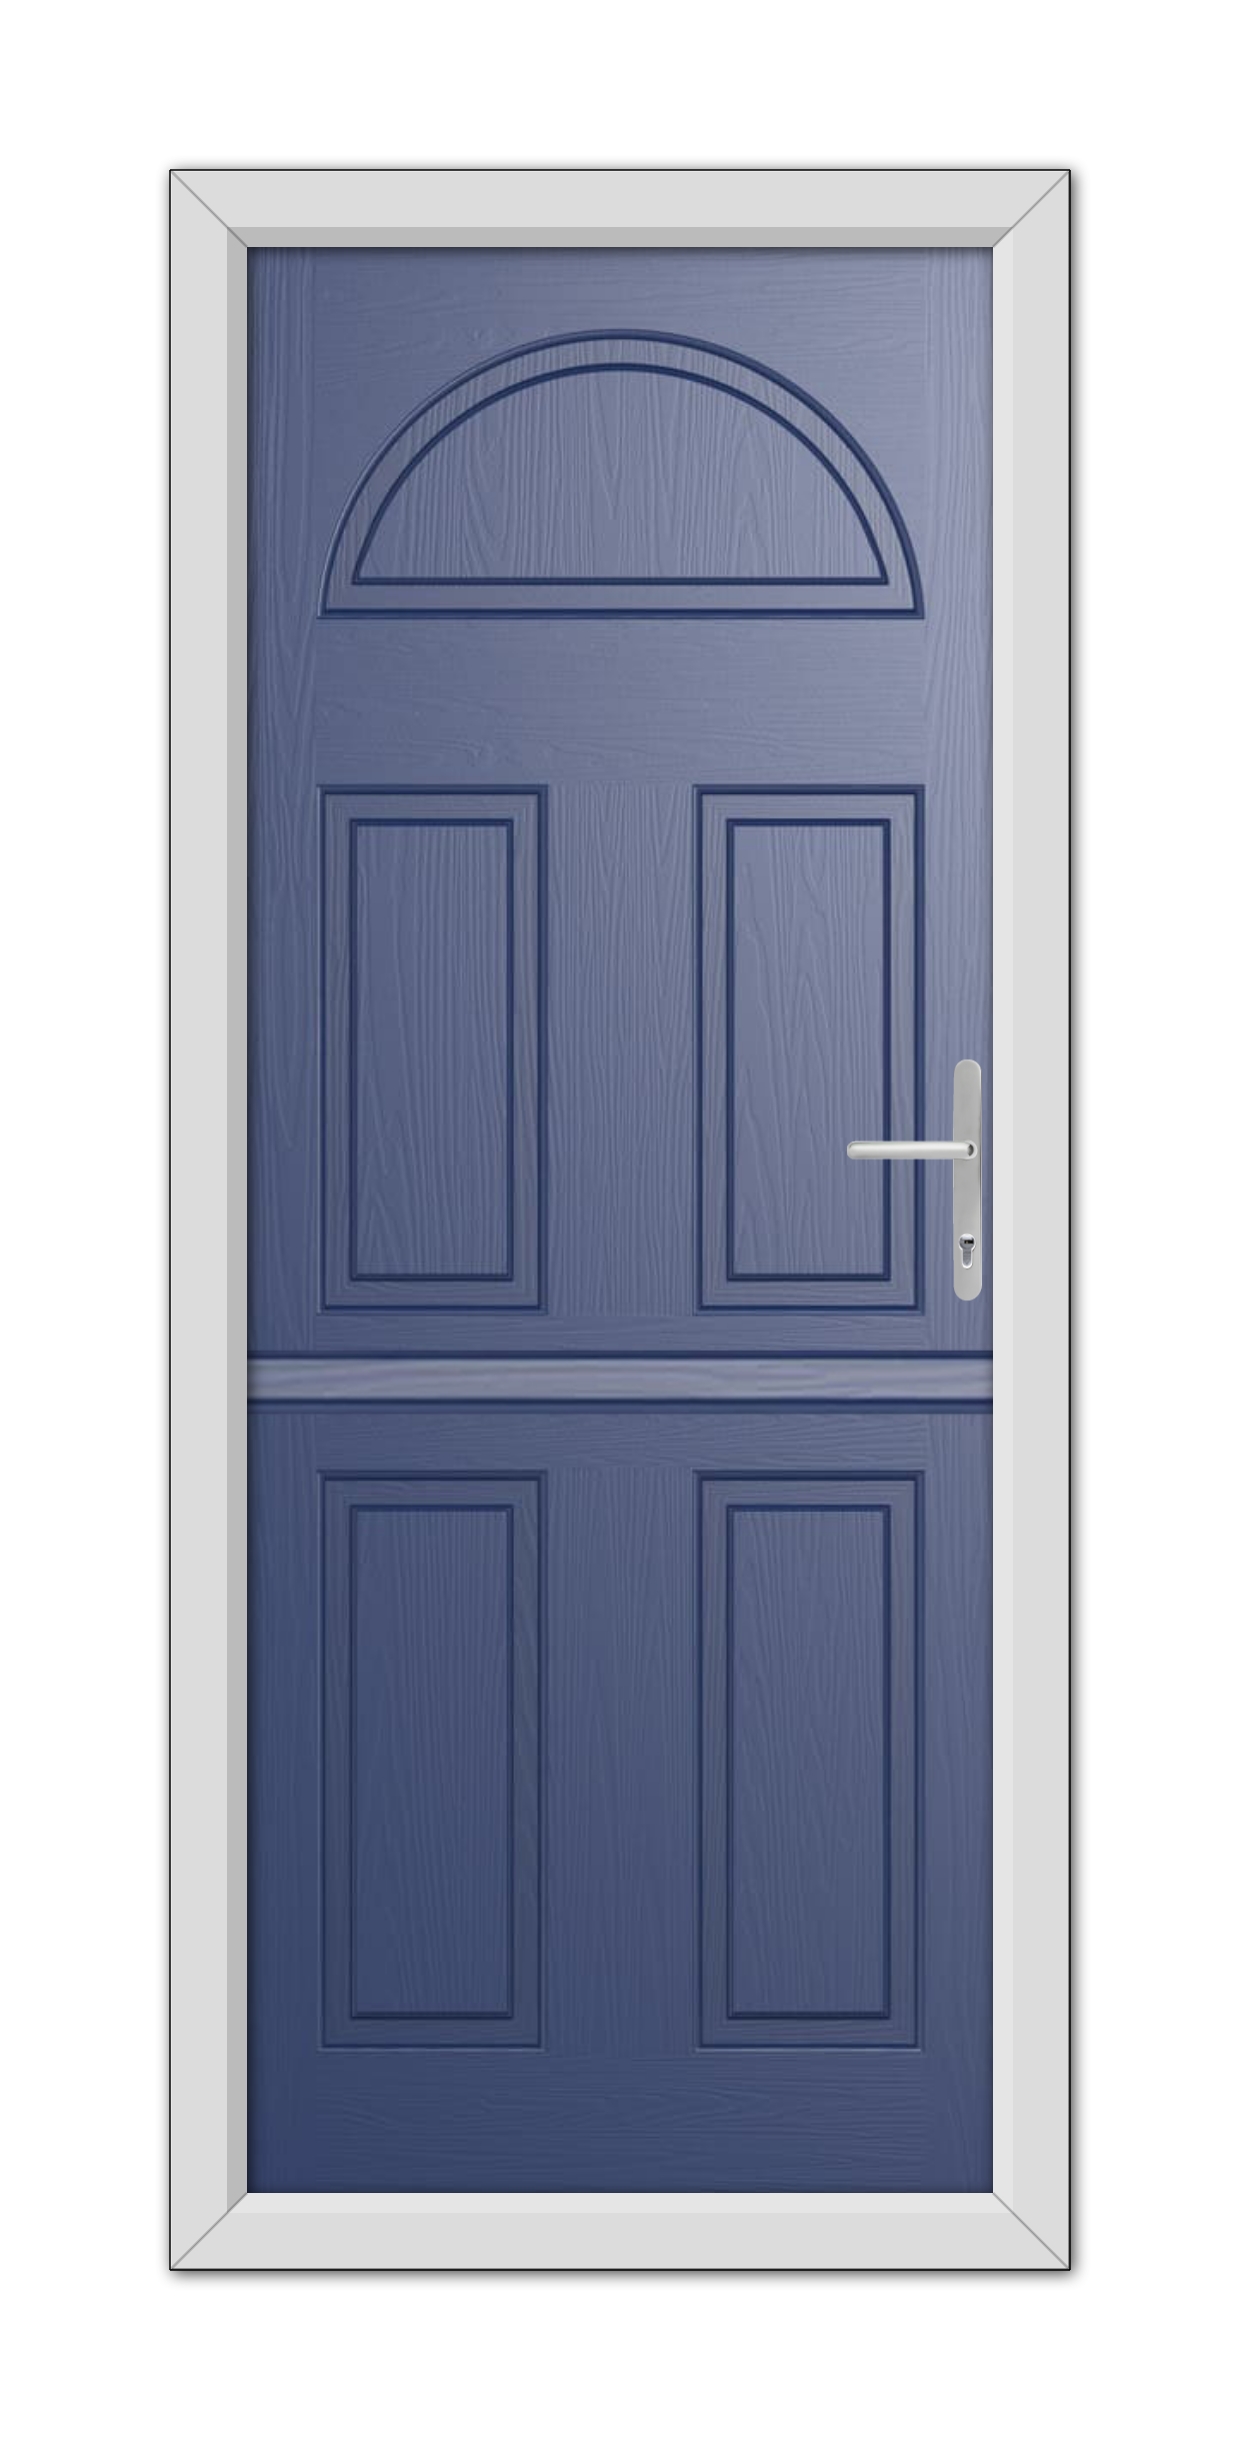 A Blue Winslow Solid Stable Composite Door 48mm Timber Core with six panels and a semicircular window at the top, set in a white frame, featuring a metallic handle on the right.